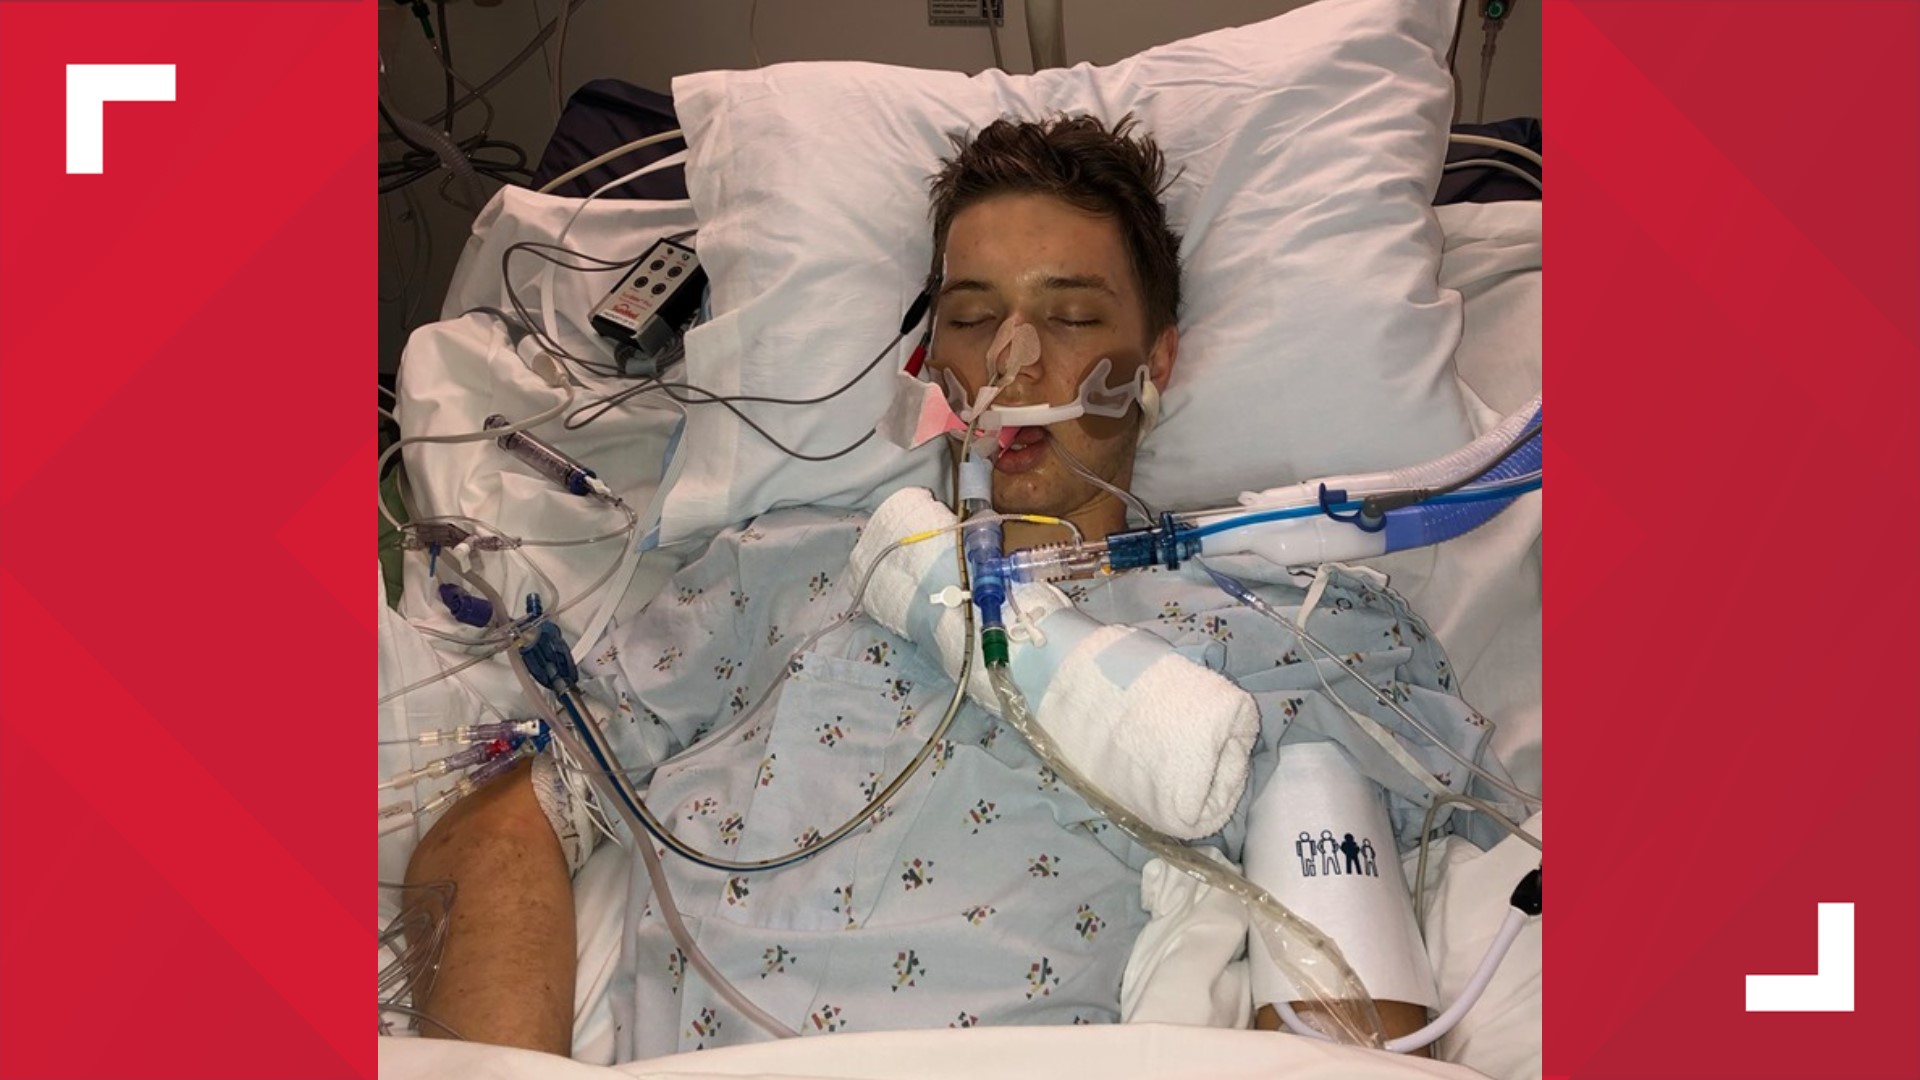 Ricky D'Ambrosio, 21, is fighting for his life in an area hospital after his mother, Christy, said he developed acute respiratory failure from vaping.